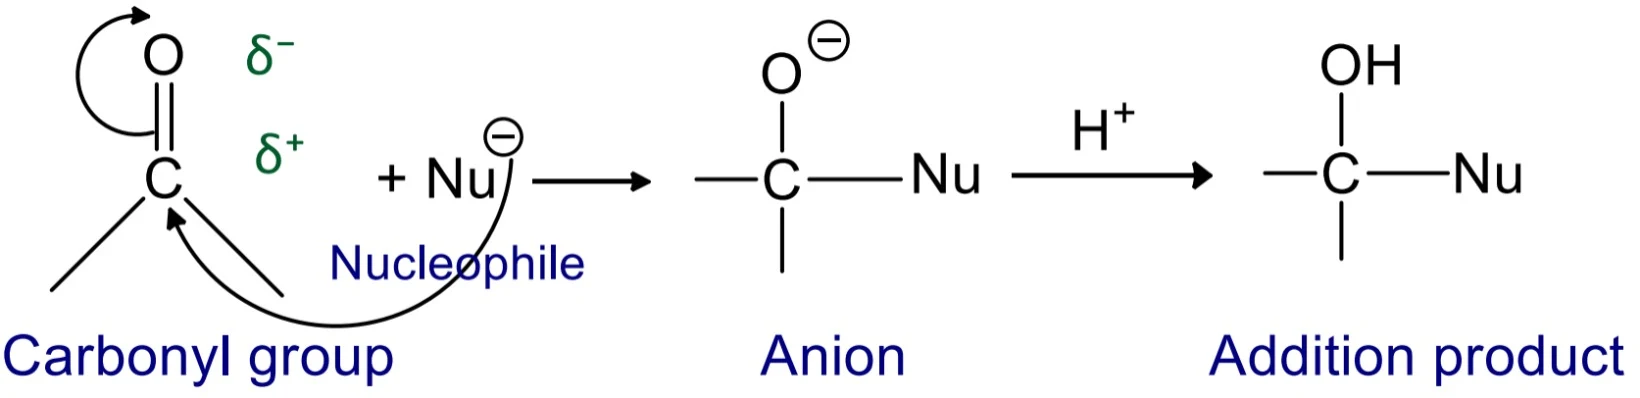 Nucleophilic addition reaction